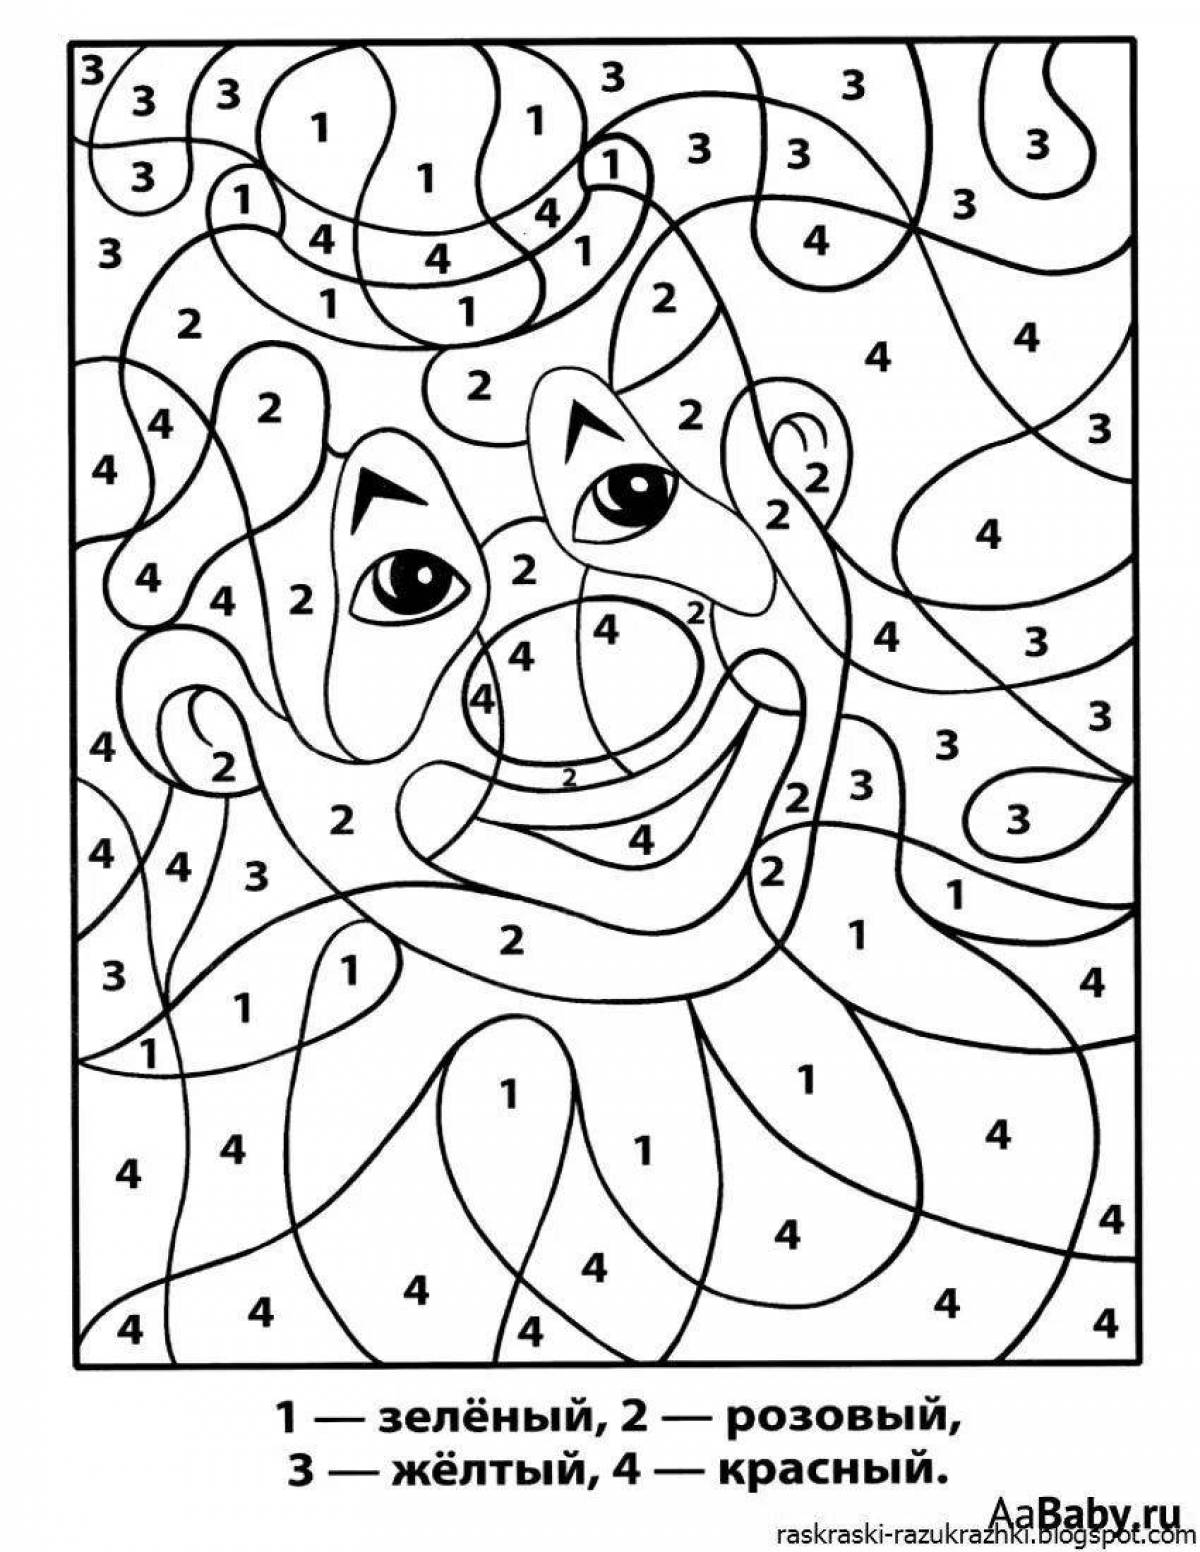 Colourful coloring page 6 years educational